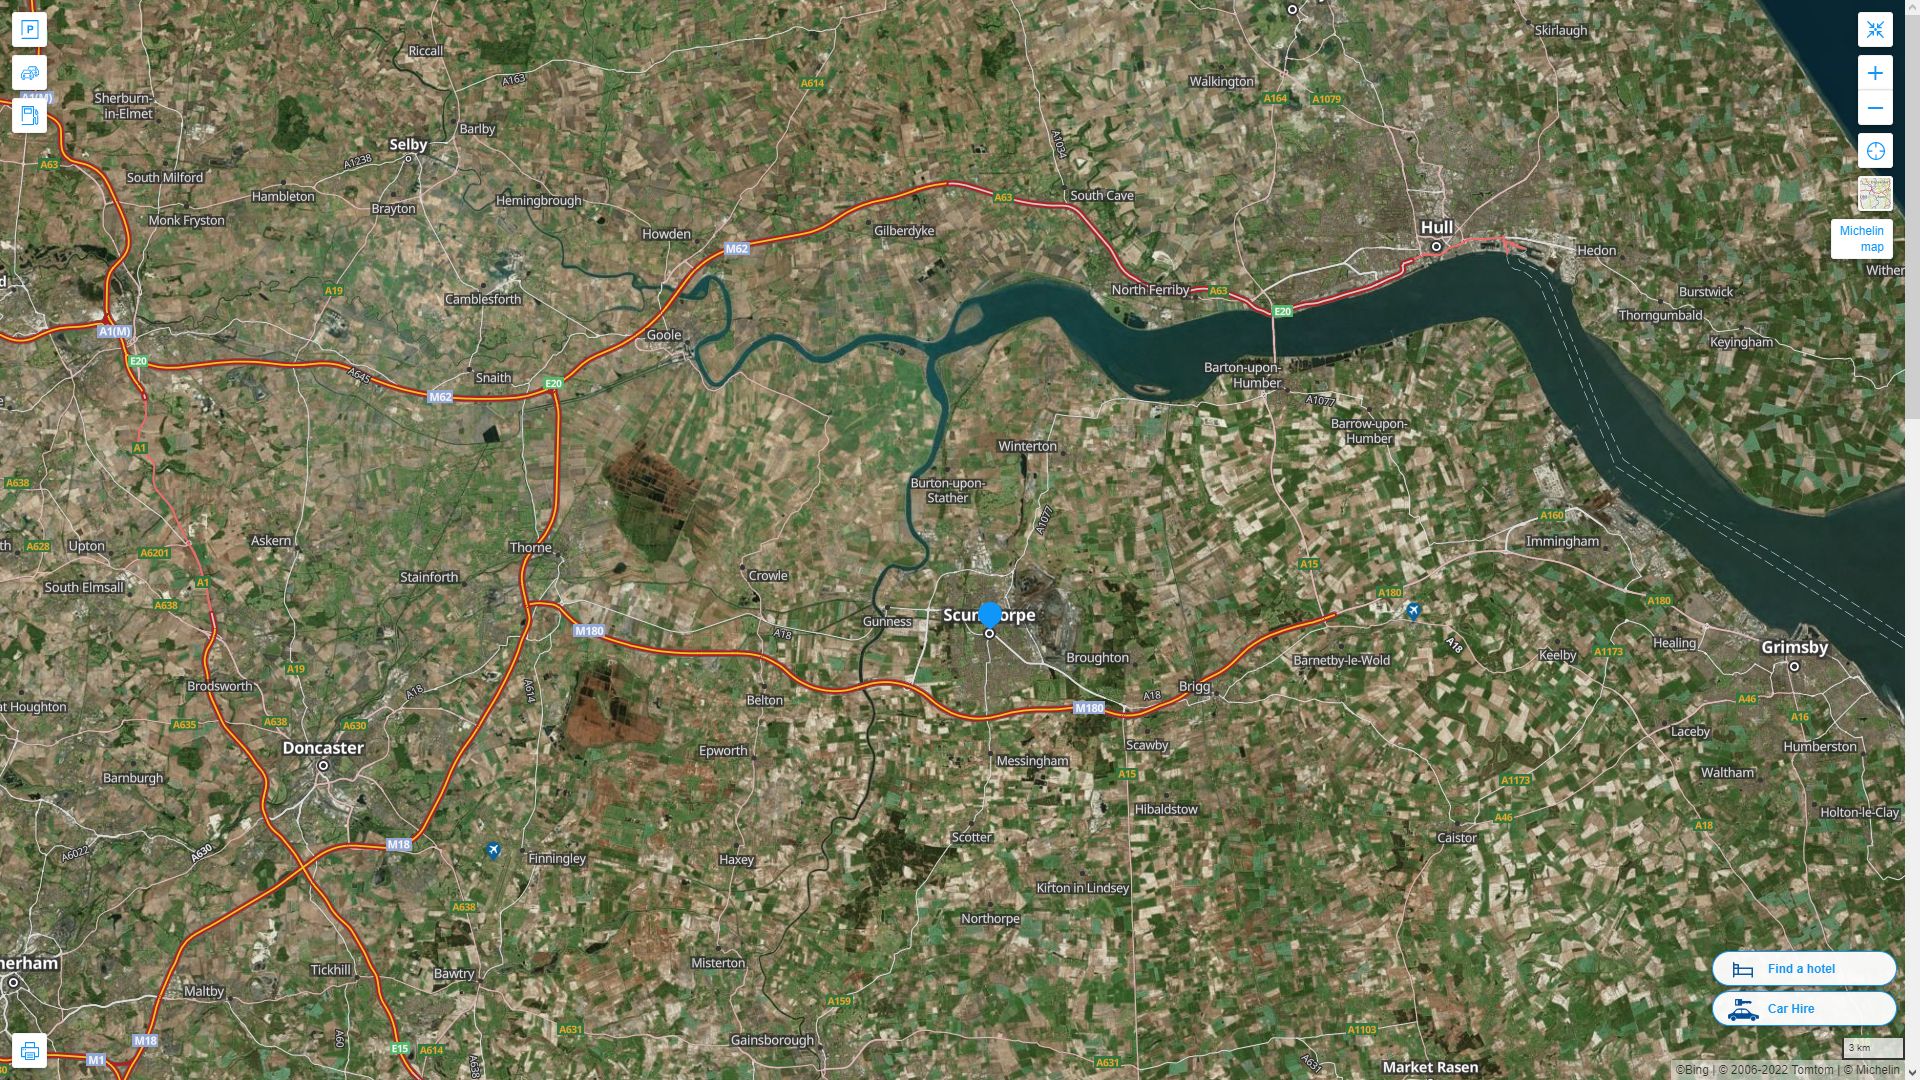 Scunthorpe Highway and Road Map with Satellite View